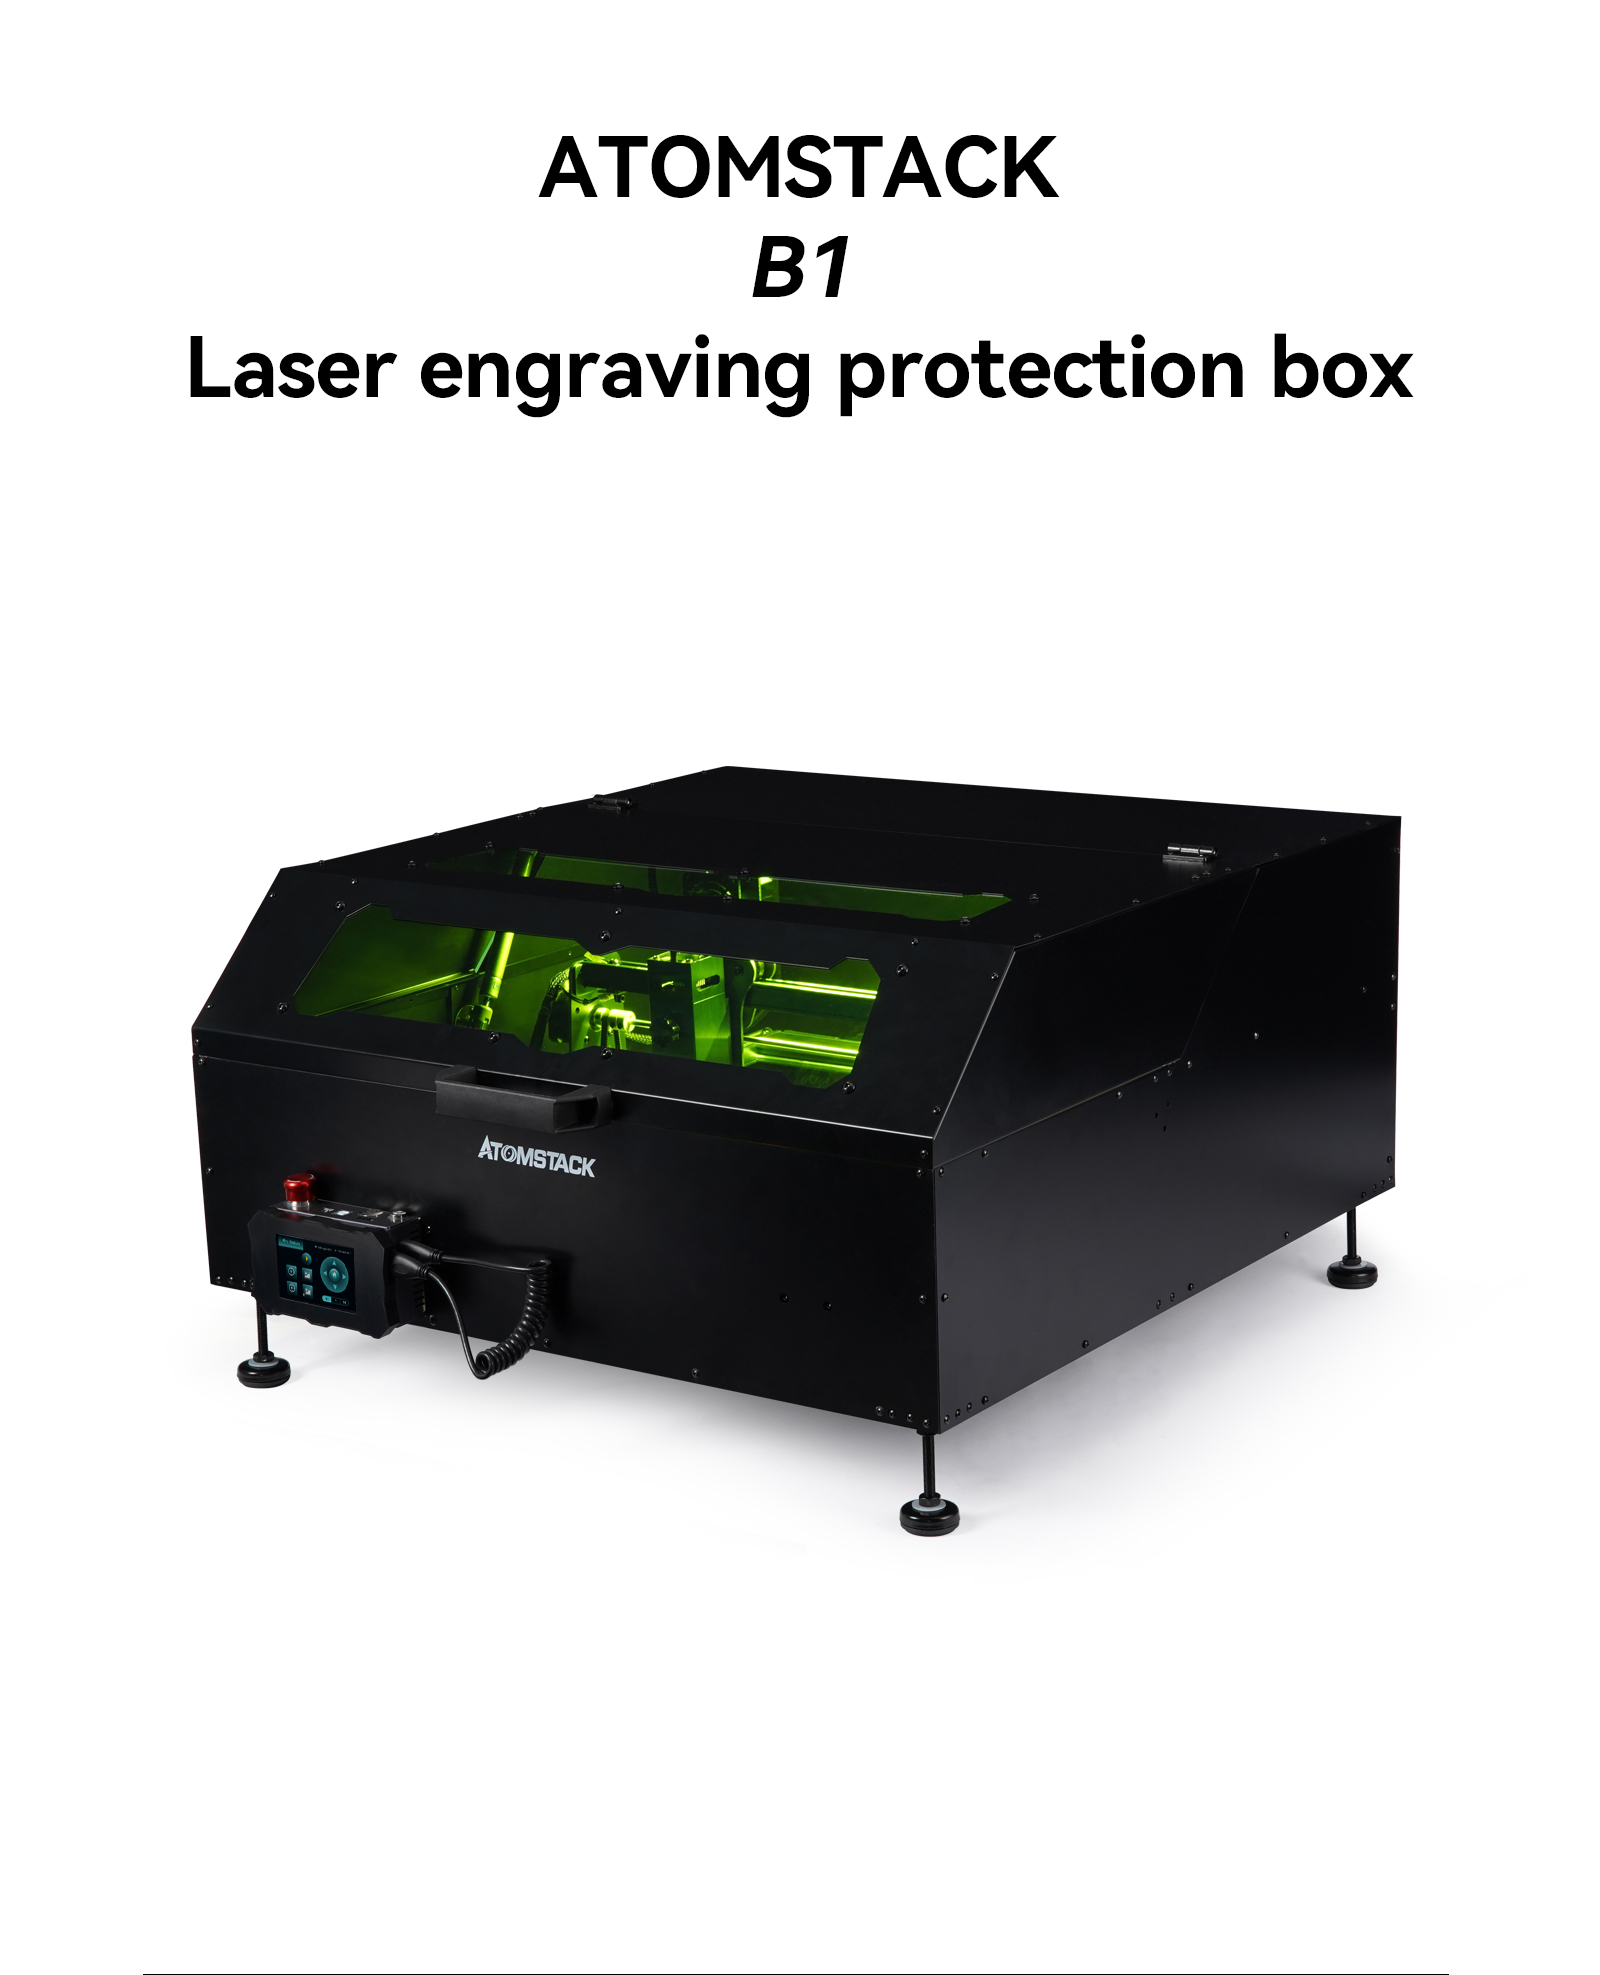 US-Direct-Atomstack-B1-Enclosure-Safe-Dust-Proof-Cover-for-Laser-Engraving-Cutting-Machine-1952167-1